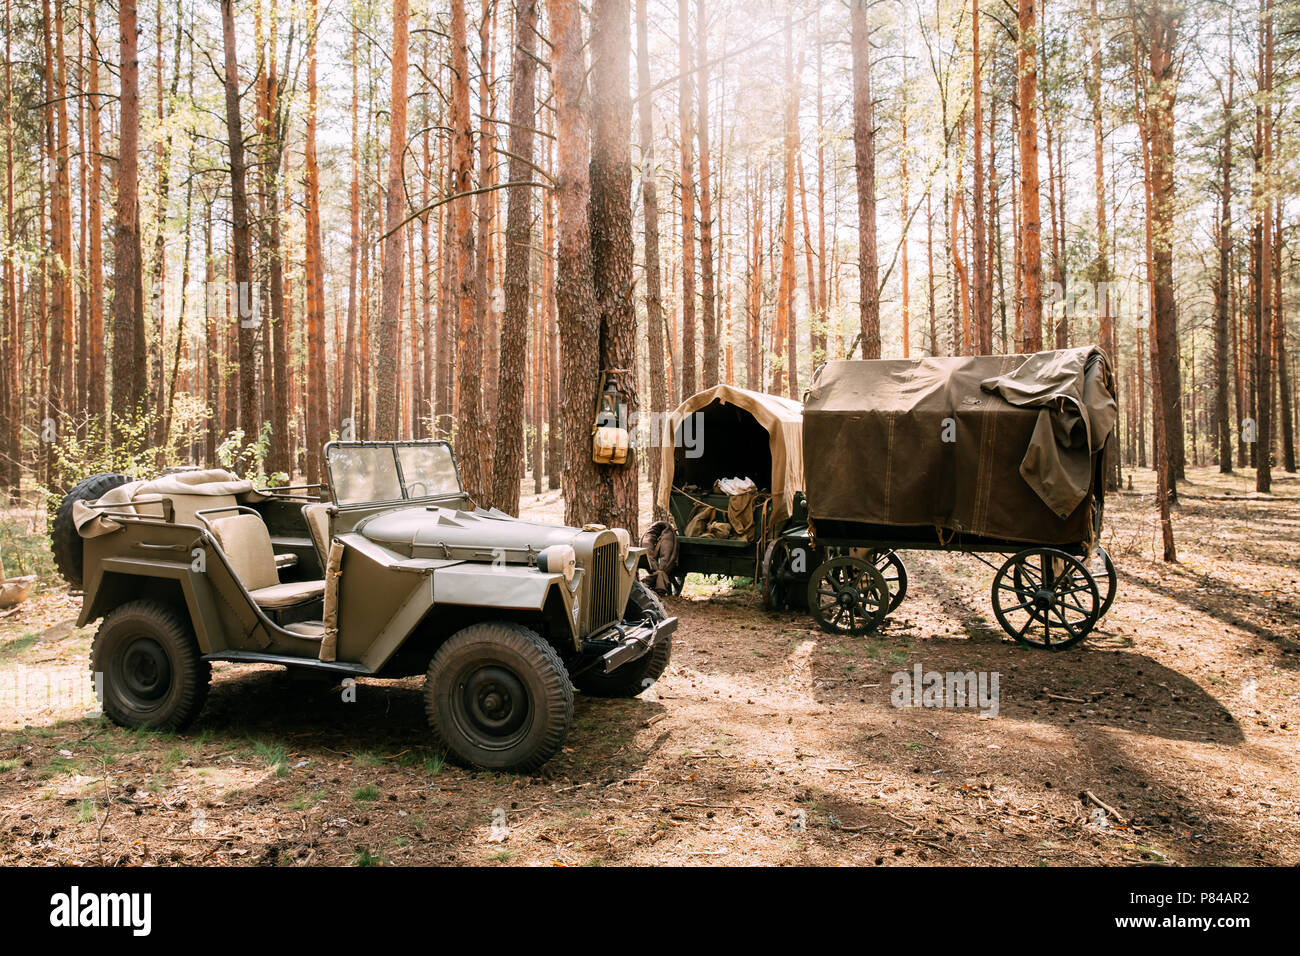 Russian Soviet World War II Four-wheel Drive Army Truck Gaz-67 Car And Peasant Carts In Forest. WWII Equipment Of Red Army. Stock Photo